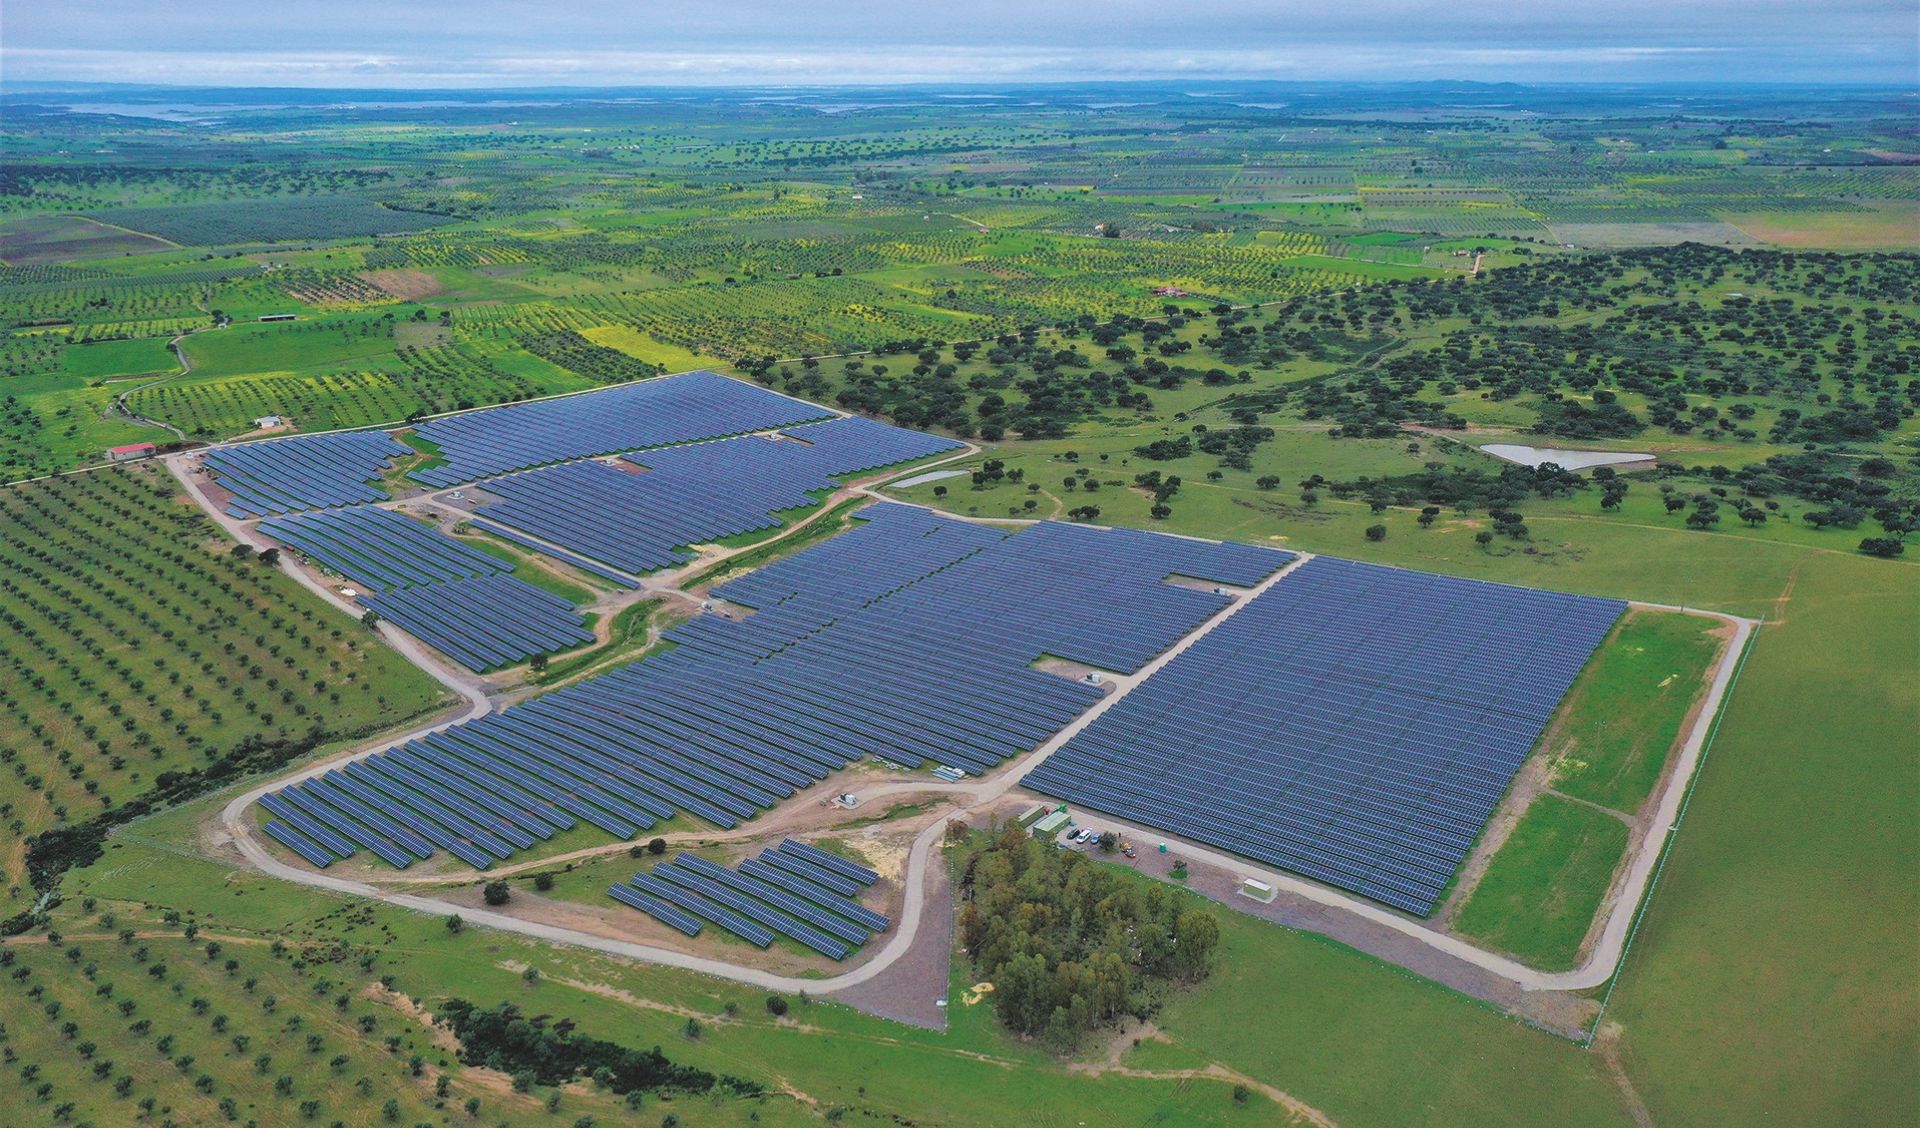 AMARELEJA SOLAR PARK – FIRST TO BE SUCCESSFULLY BROUGHT ONLINE IN PORTUAL.